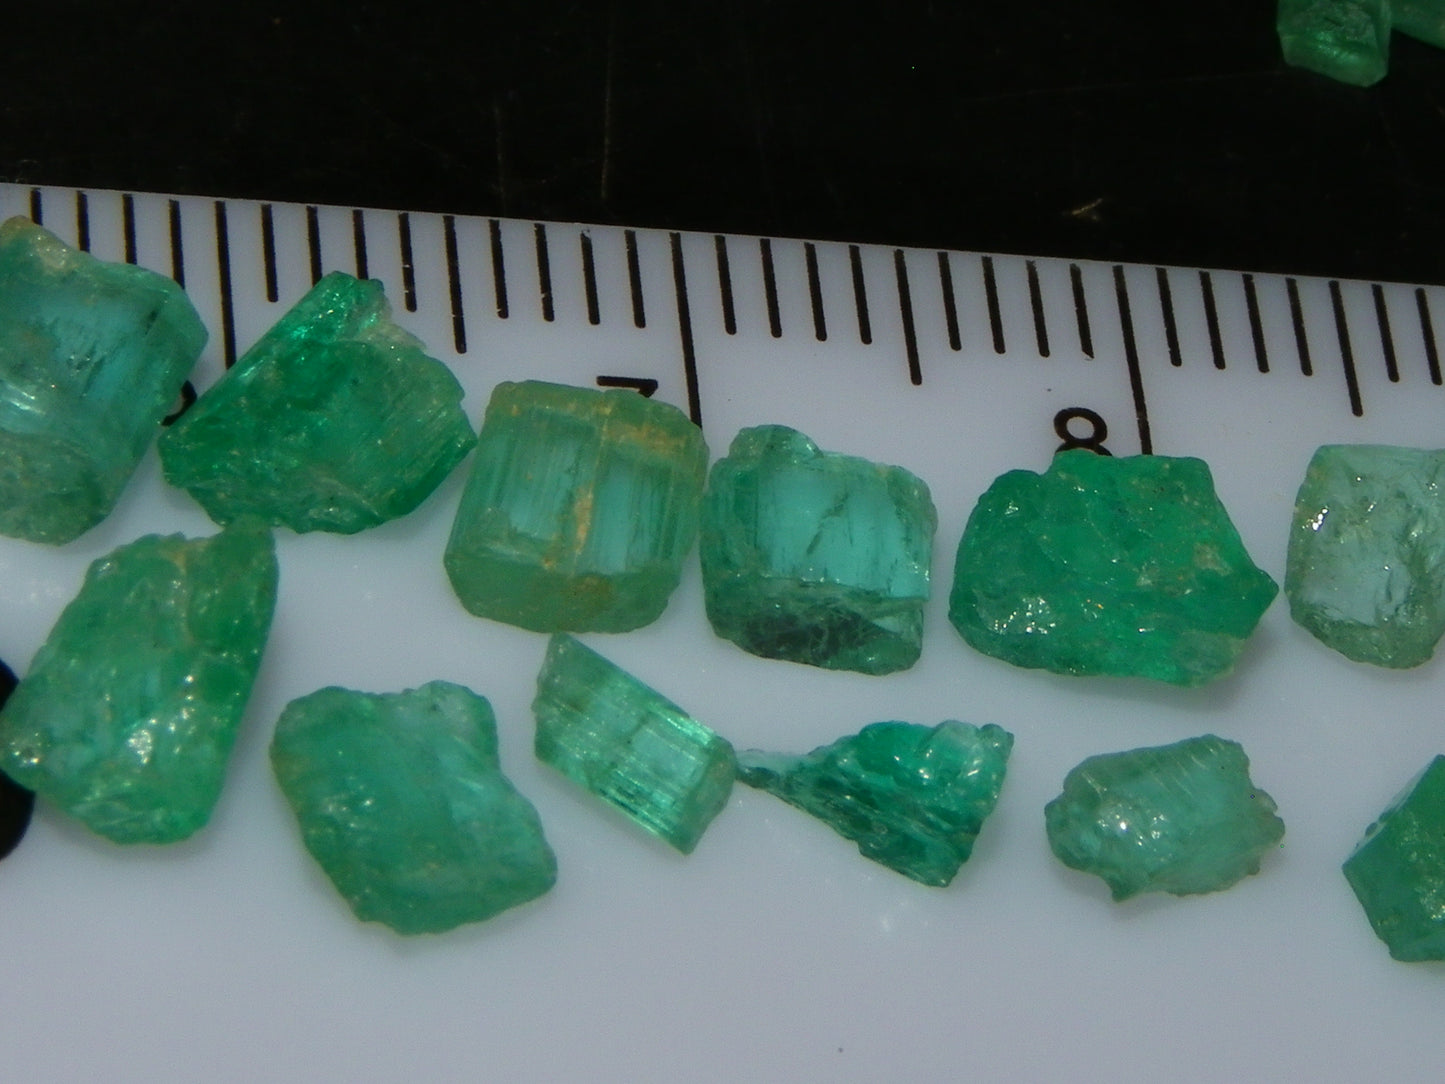 NIce Quality Emerald Crystals 31.5cts Panjshir Valley Afghanistan